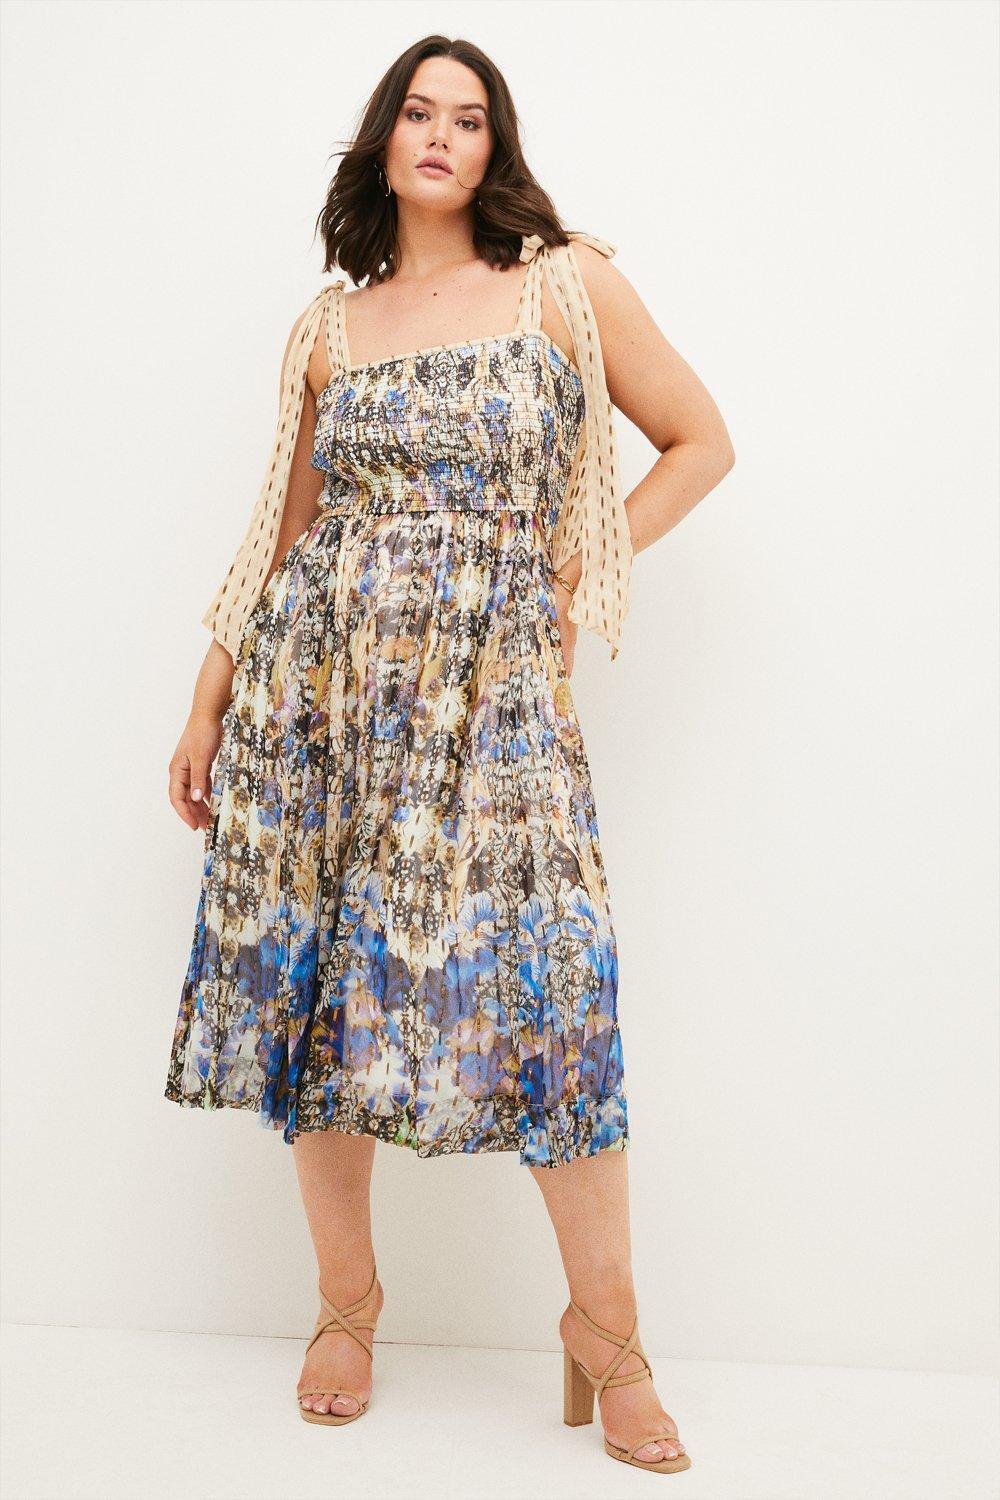 23 Gorgeous Plus Size Wedding Guest Dresses You're Going to Love